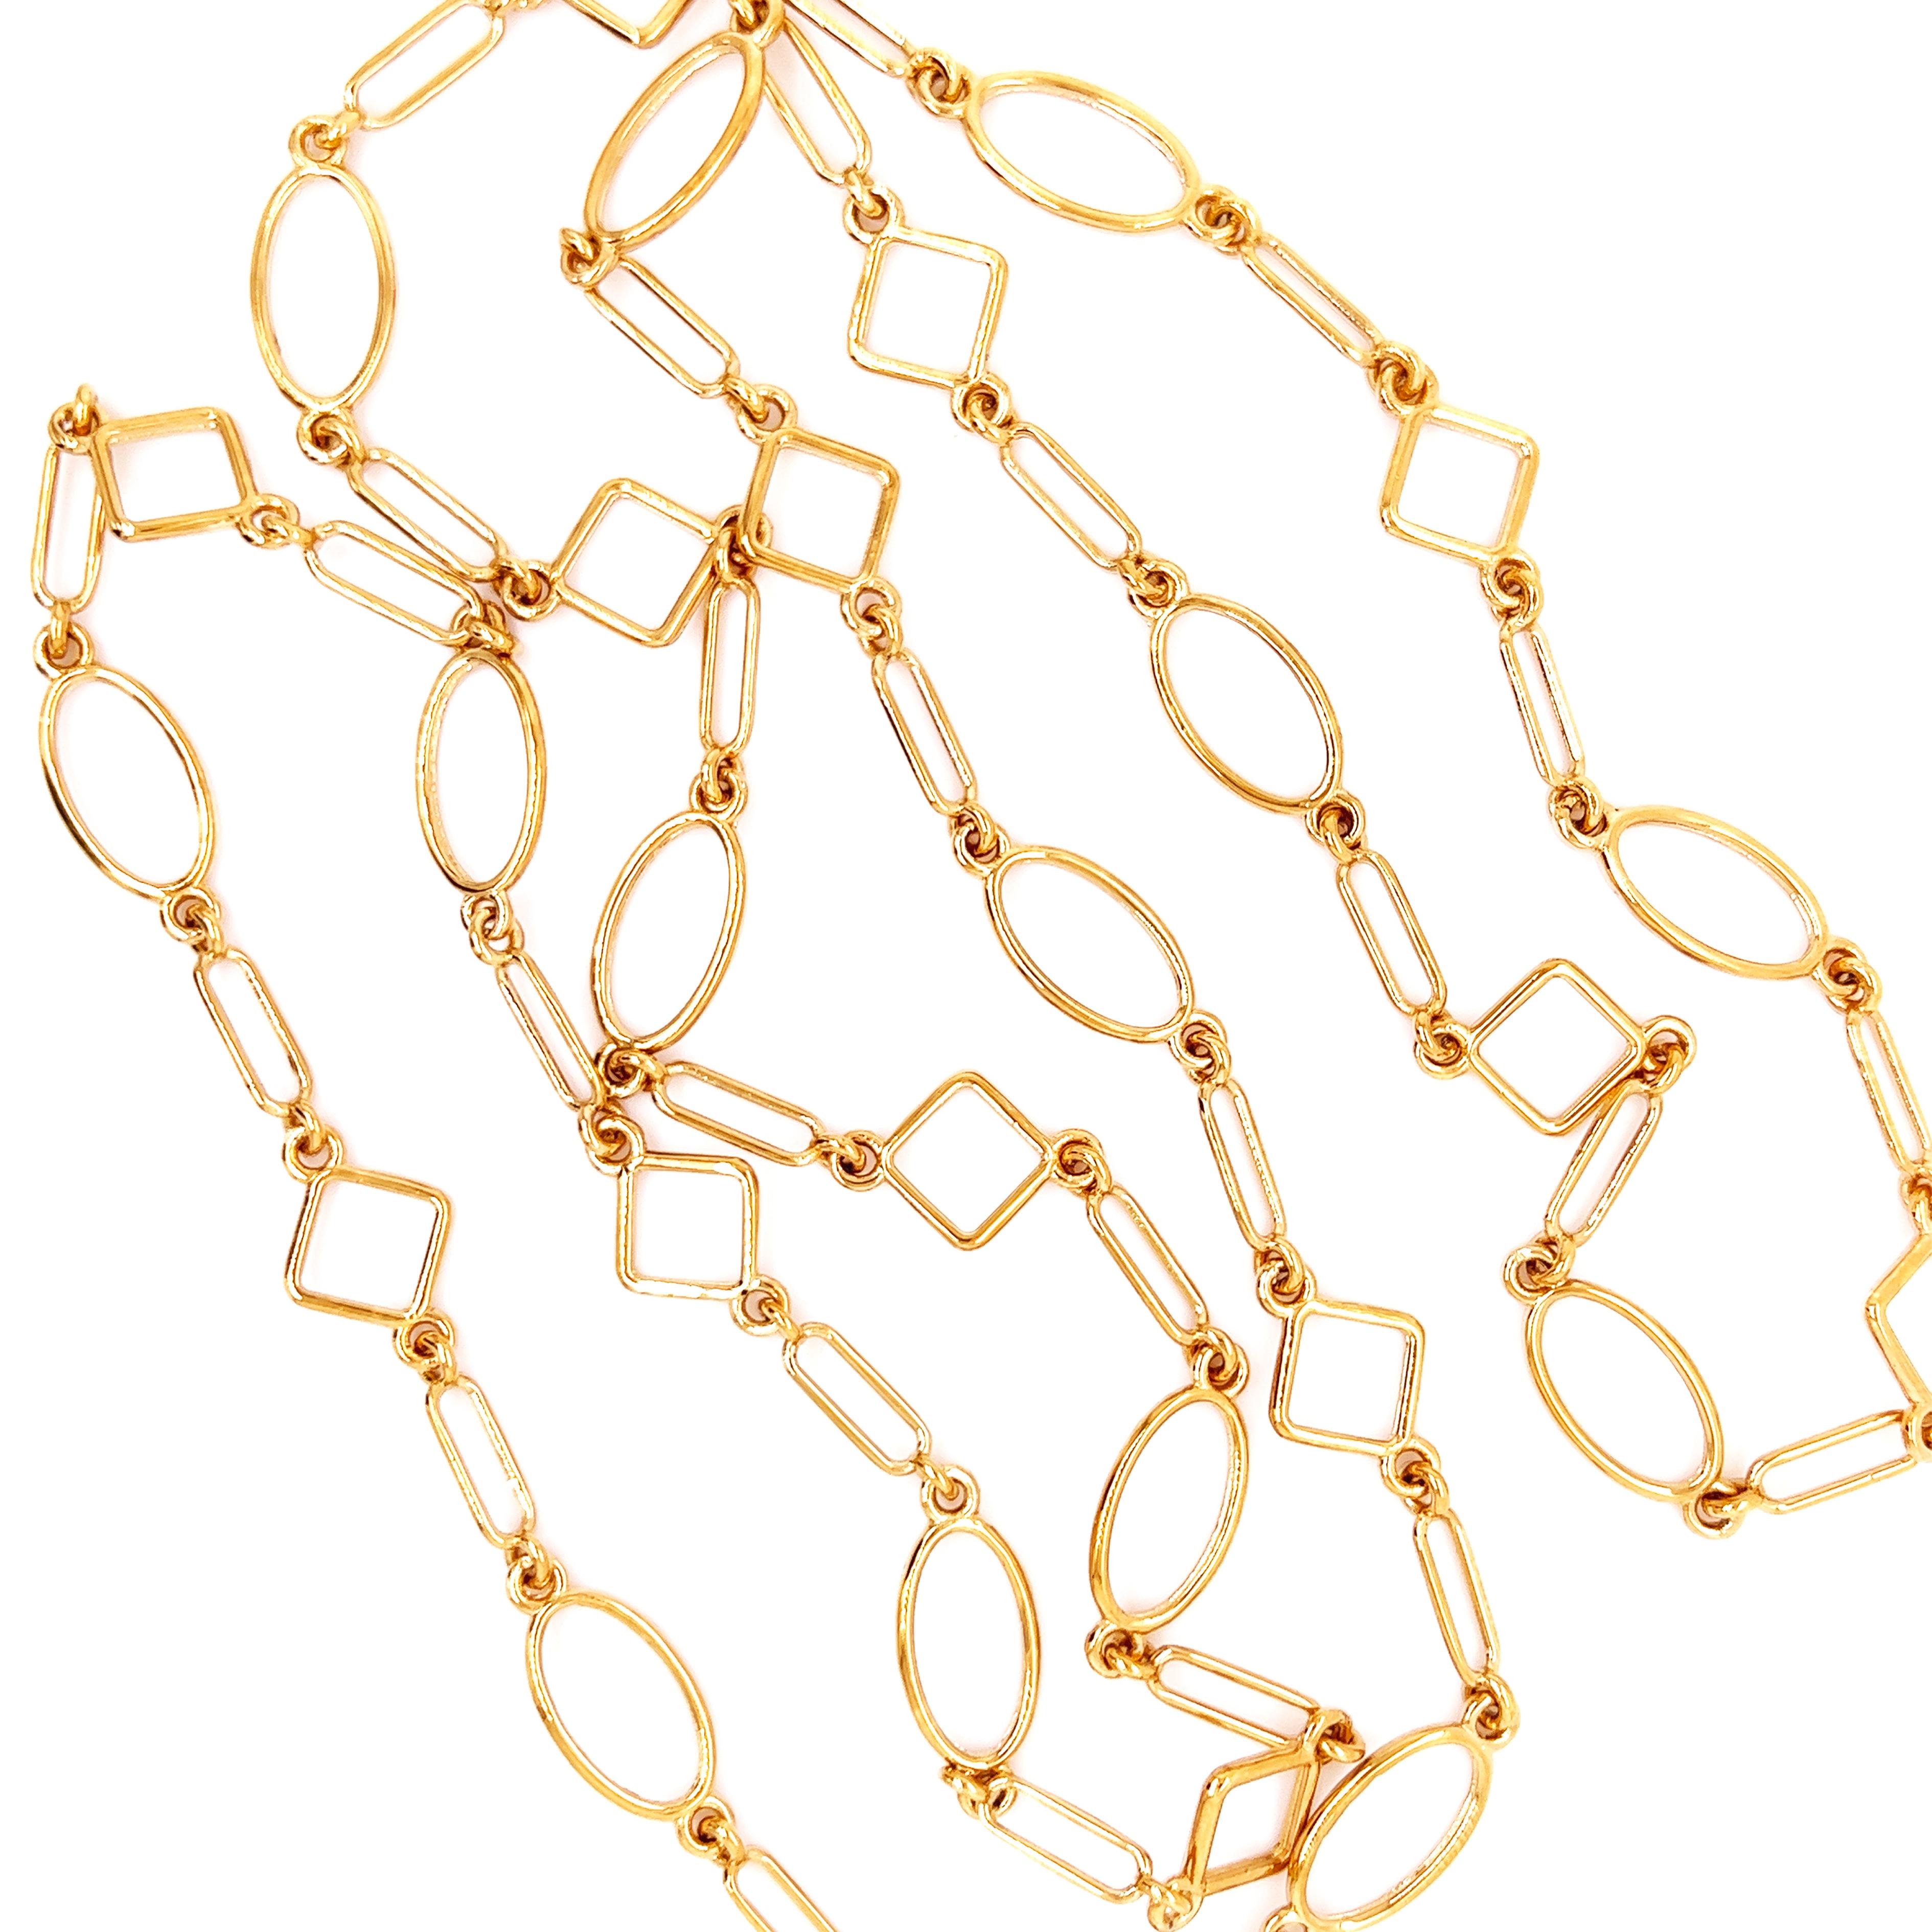 Chic yet Timeless Geometrical Long Chain Necklace composed by ovals alternated with rectangular and rhombus shaped links to create an harmonious, elegant, balanced movement(35.43inches, 90cm), 29.80g, 0.105 Troy Ounces.
This piece is a beautiful